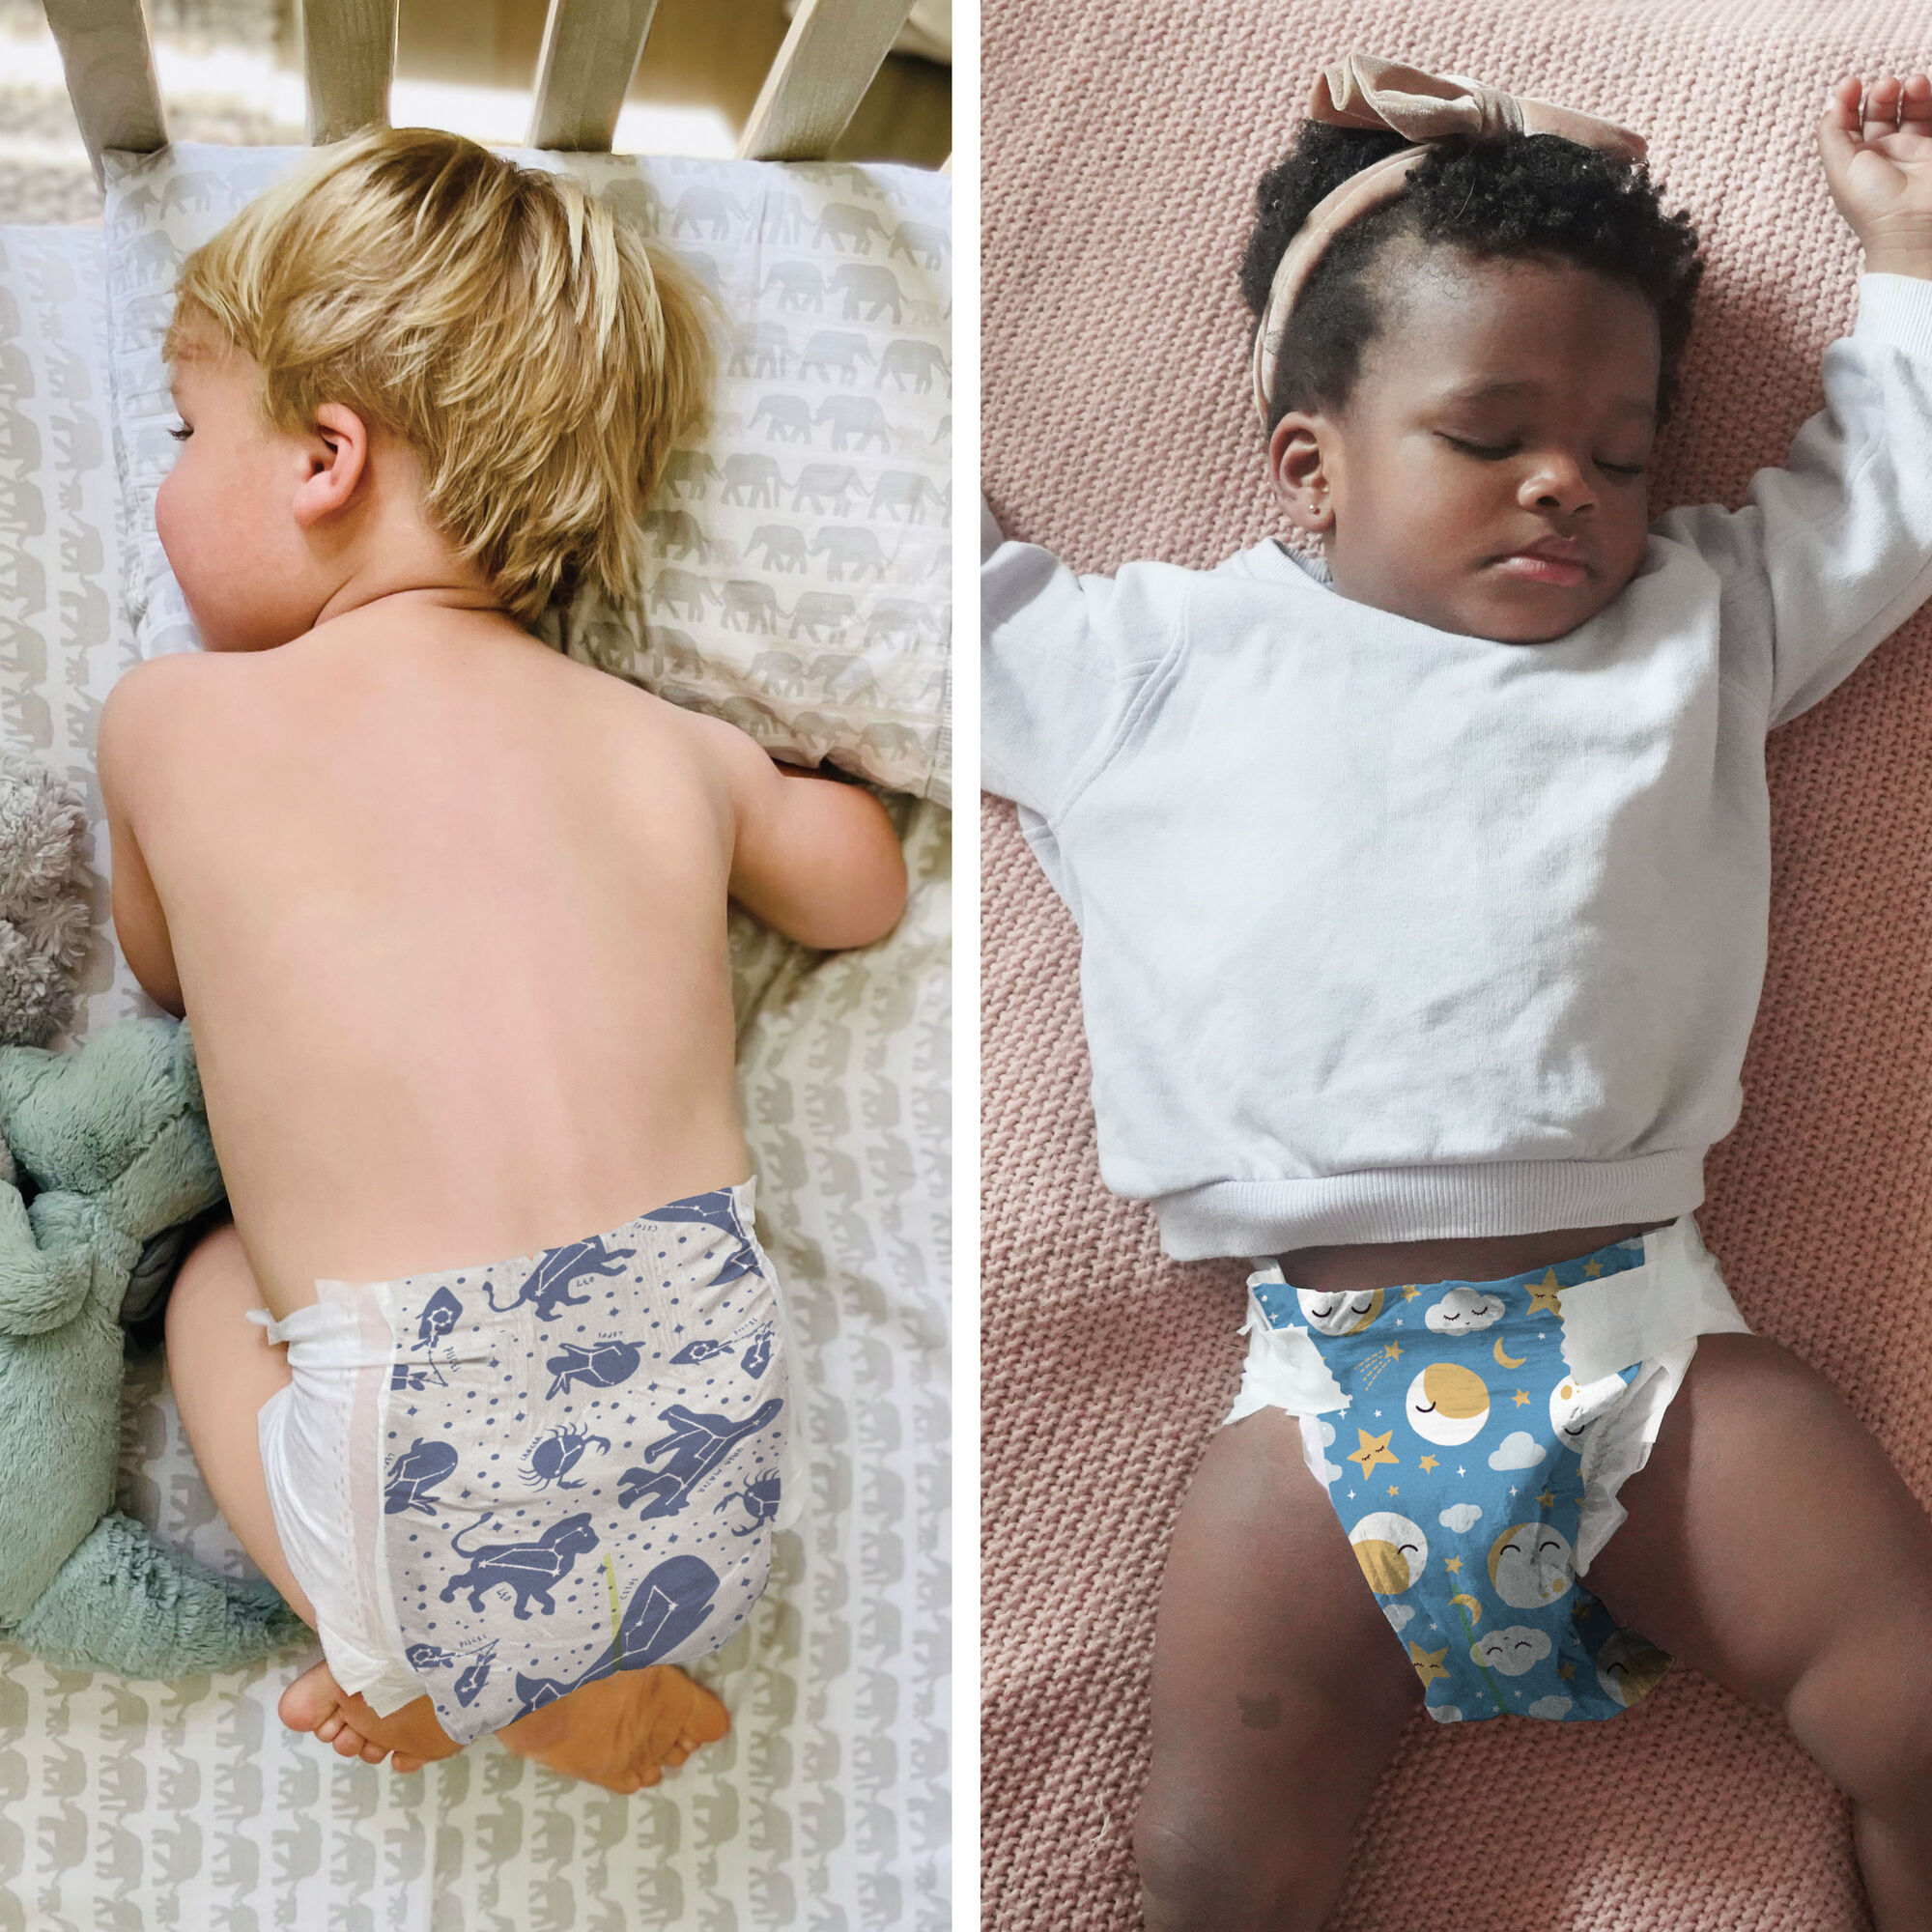 good.night layers, Our goodnight diaper just got better! In…